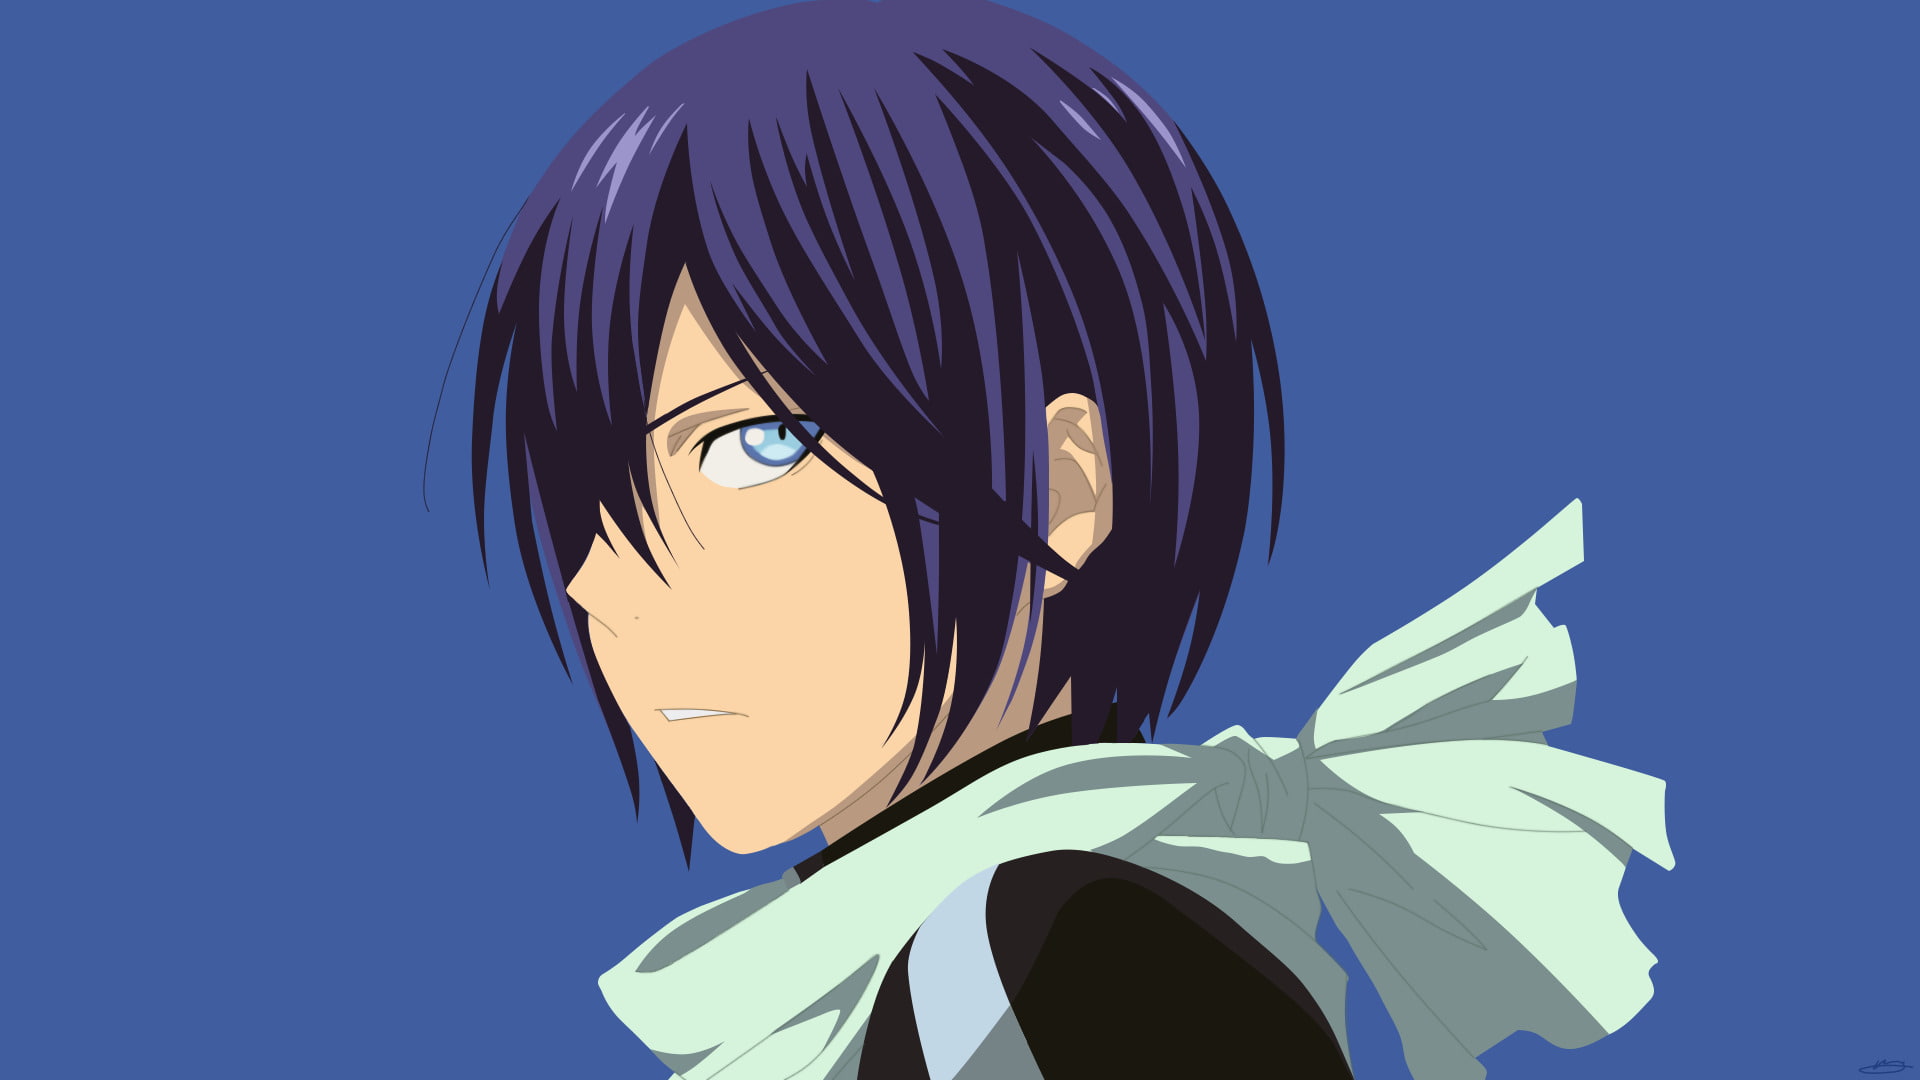 5. "Yato from Noragami" - wide 2